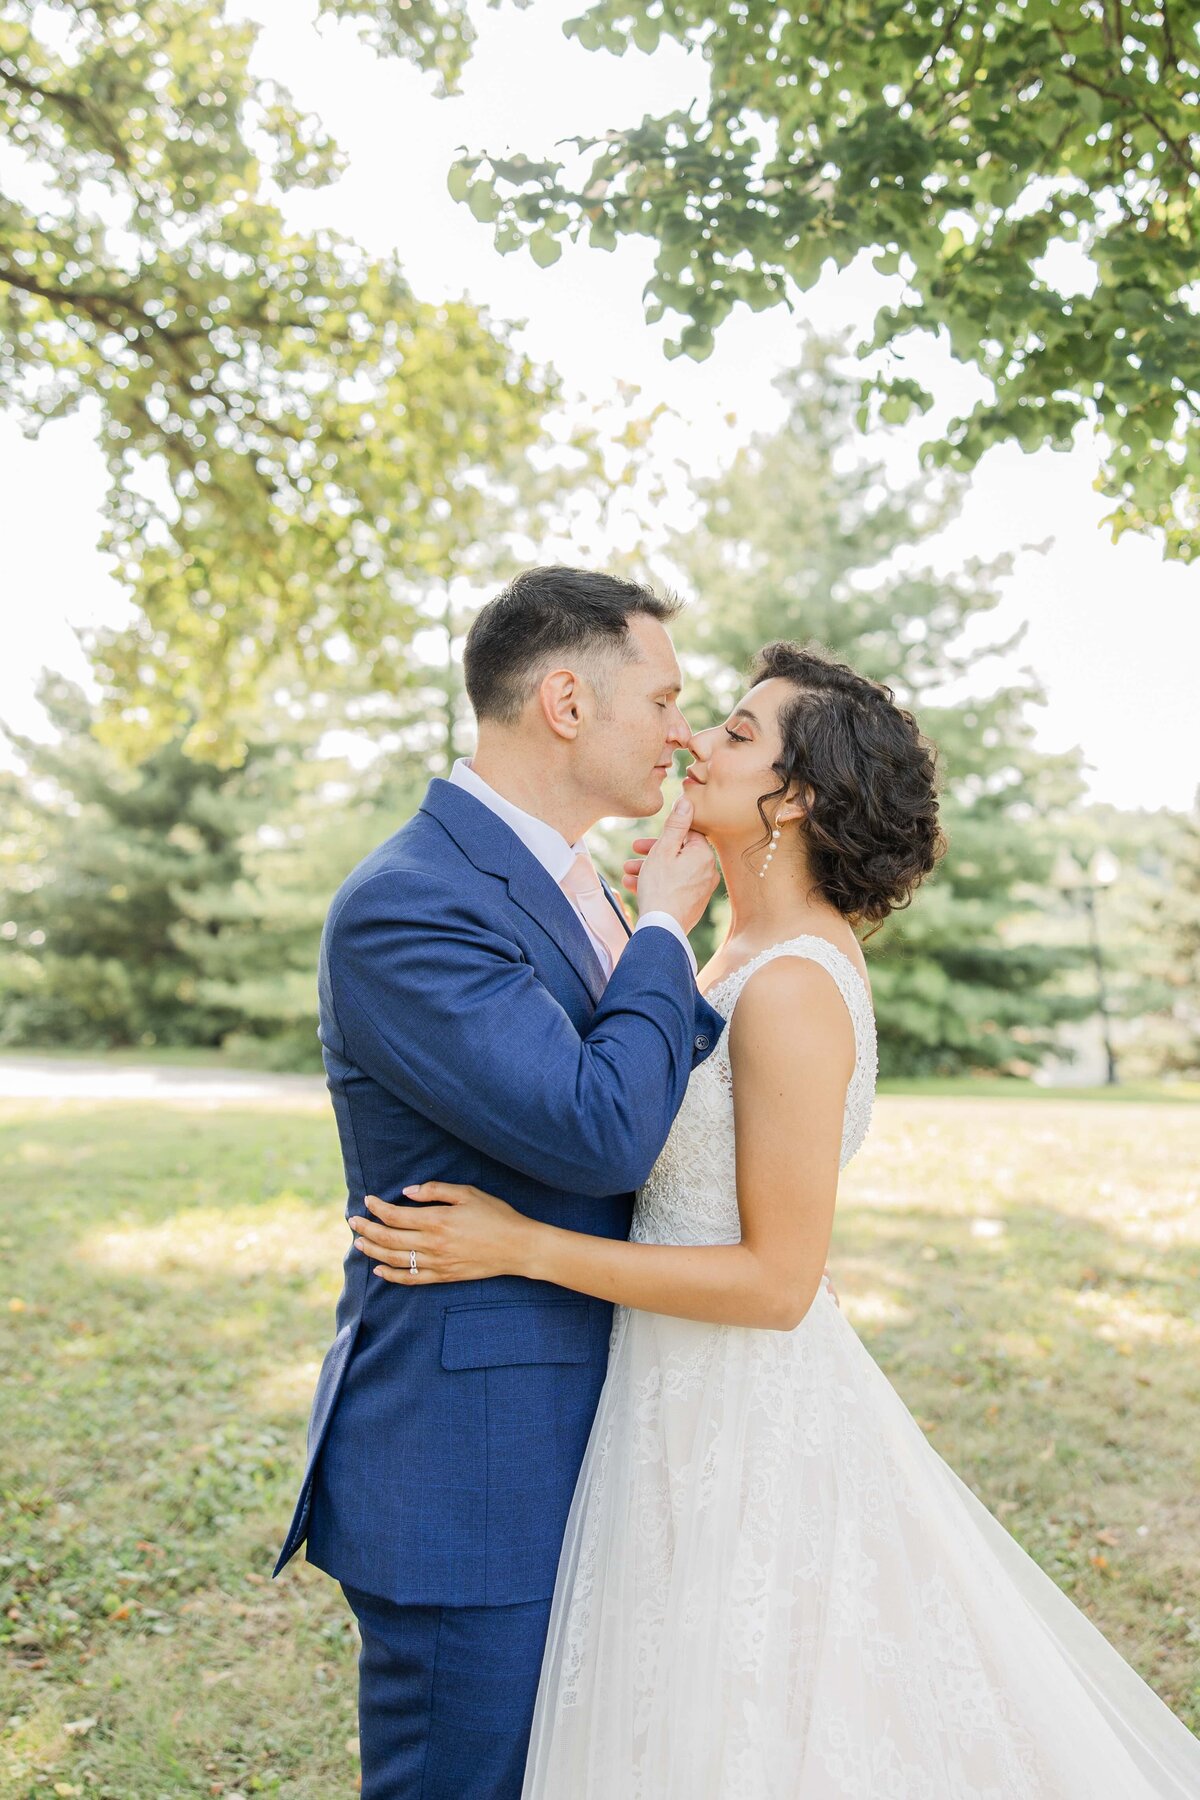 A bride in a white dress and a groom in a blue suit kissing outdoors at Park Farm Winery, surrounded by trees and sunlight.